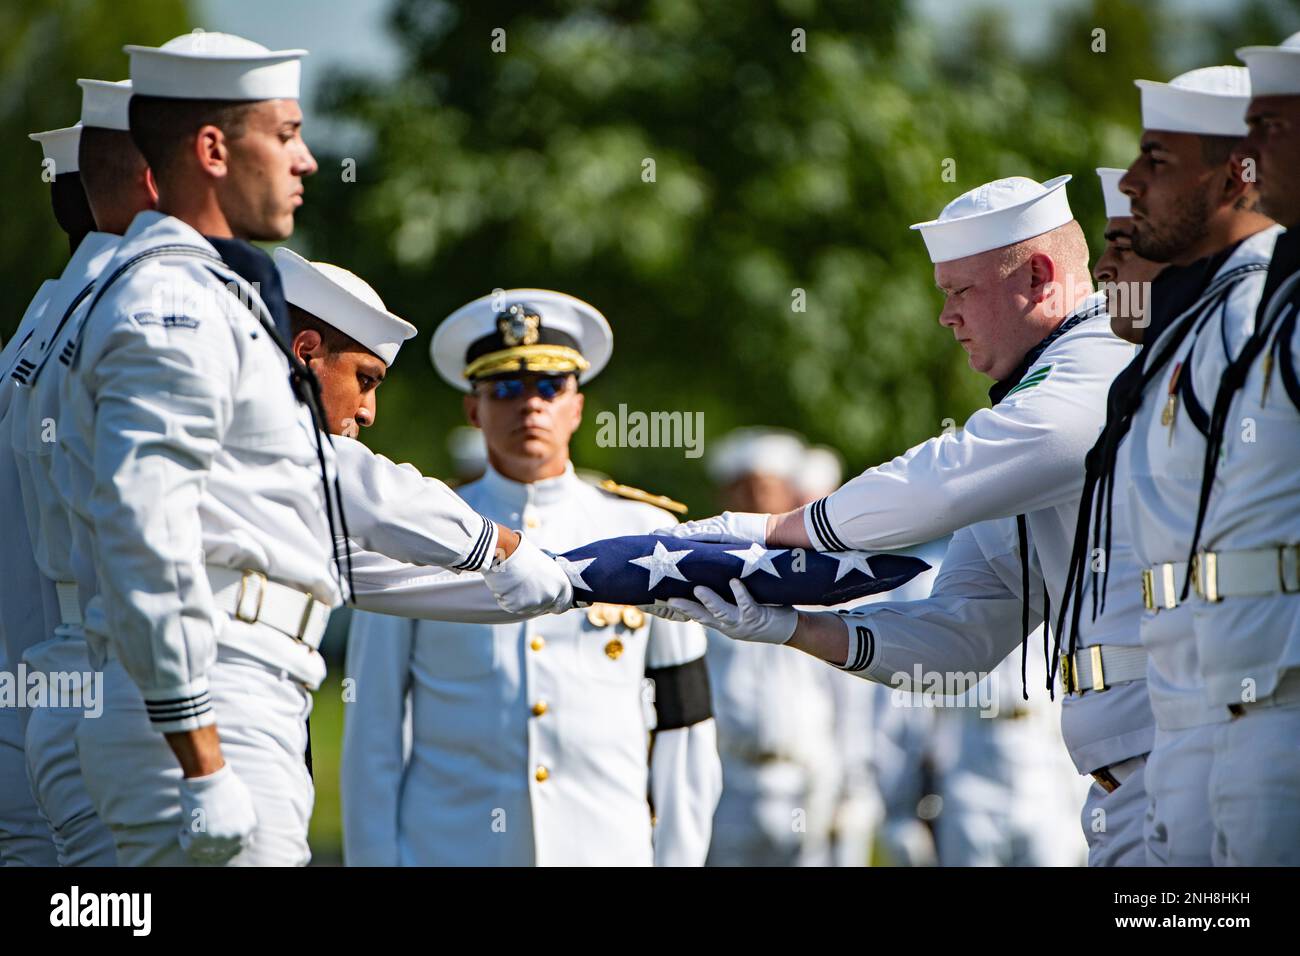 Service members from the U.S. Navy Ceremonial Guard, the U.S. Navy Ceremonial Band, and the 3d U.S. Infantry Regiment (the Old Guard) Caisson Platoon conduct military funeral honors with funeral escort for U.S. Navy Chief Pharmacist’s Mate James T. Cheshire in Section 62 of Arlington National Cemetery, Arlington, Va., July 22, 2022. Cheshire died on Dec. 7, 1941 when the battleship he was assigned to, the USS Oklahoma at Ford Island, Pearl Harbor, was attacked by Japanese aircraft.    From the Defense POW/MIA Account Agency (DPAA) press release:    The USS Oklahoma sustained multiple torpedo h Stock Photo